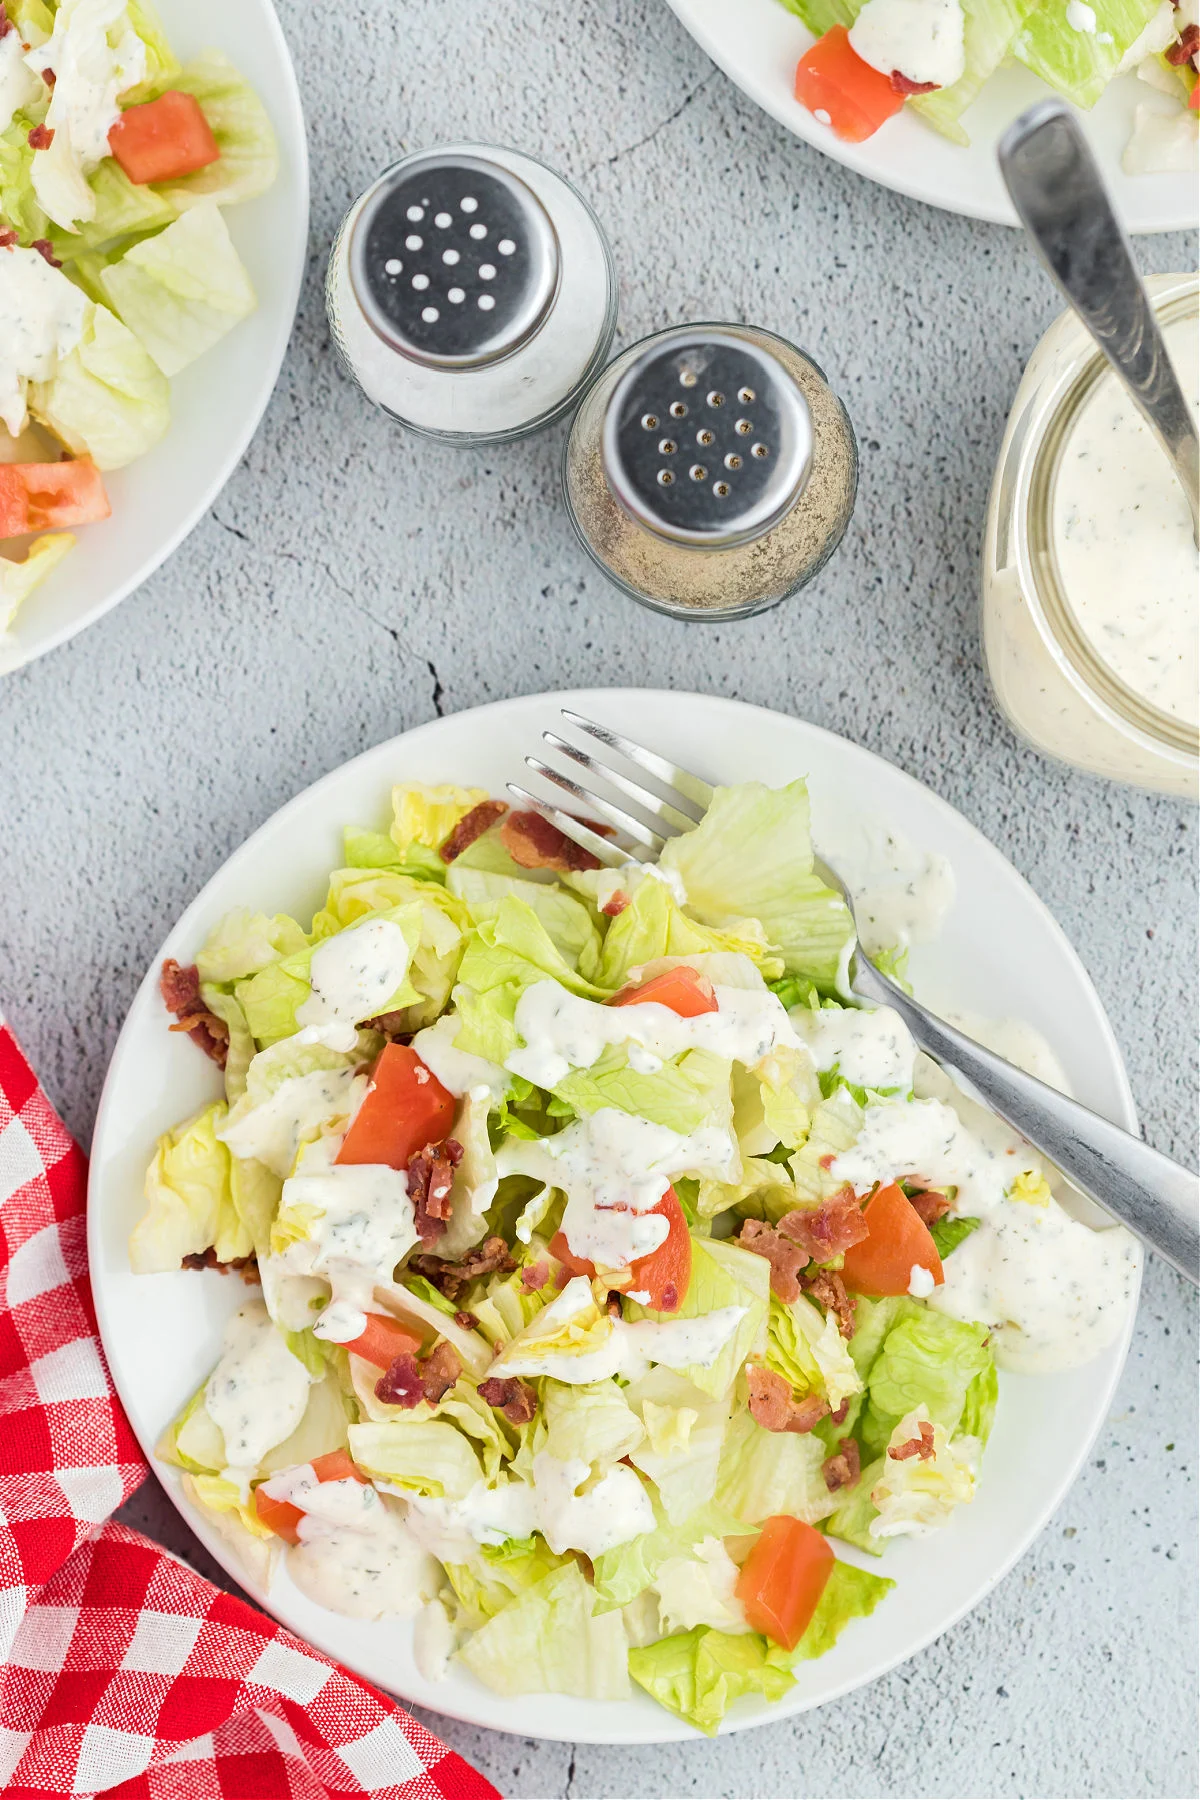 Wedge salad with homemade ranch dressing.